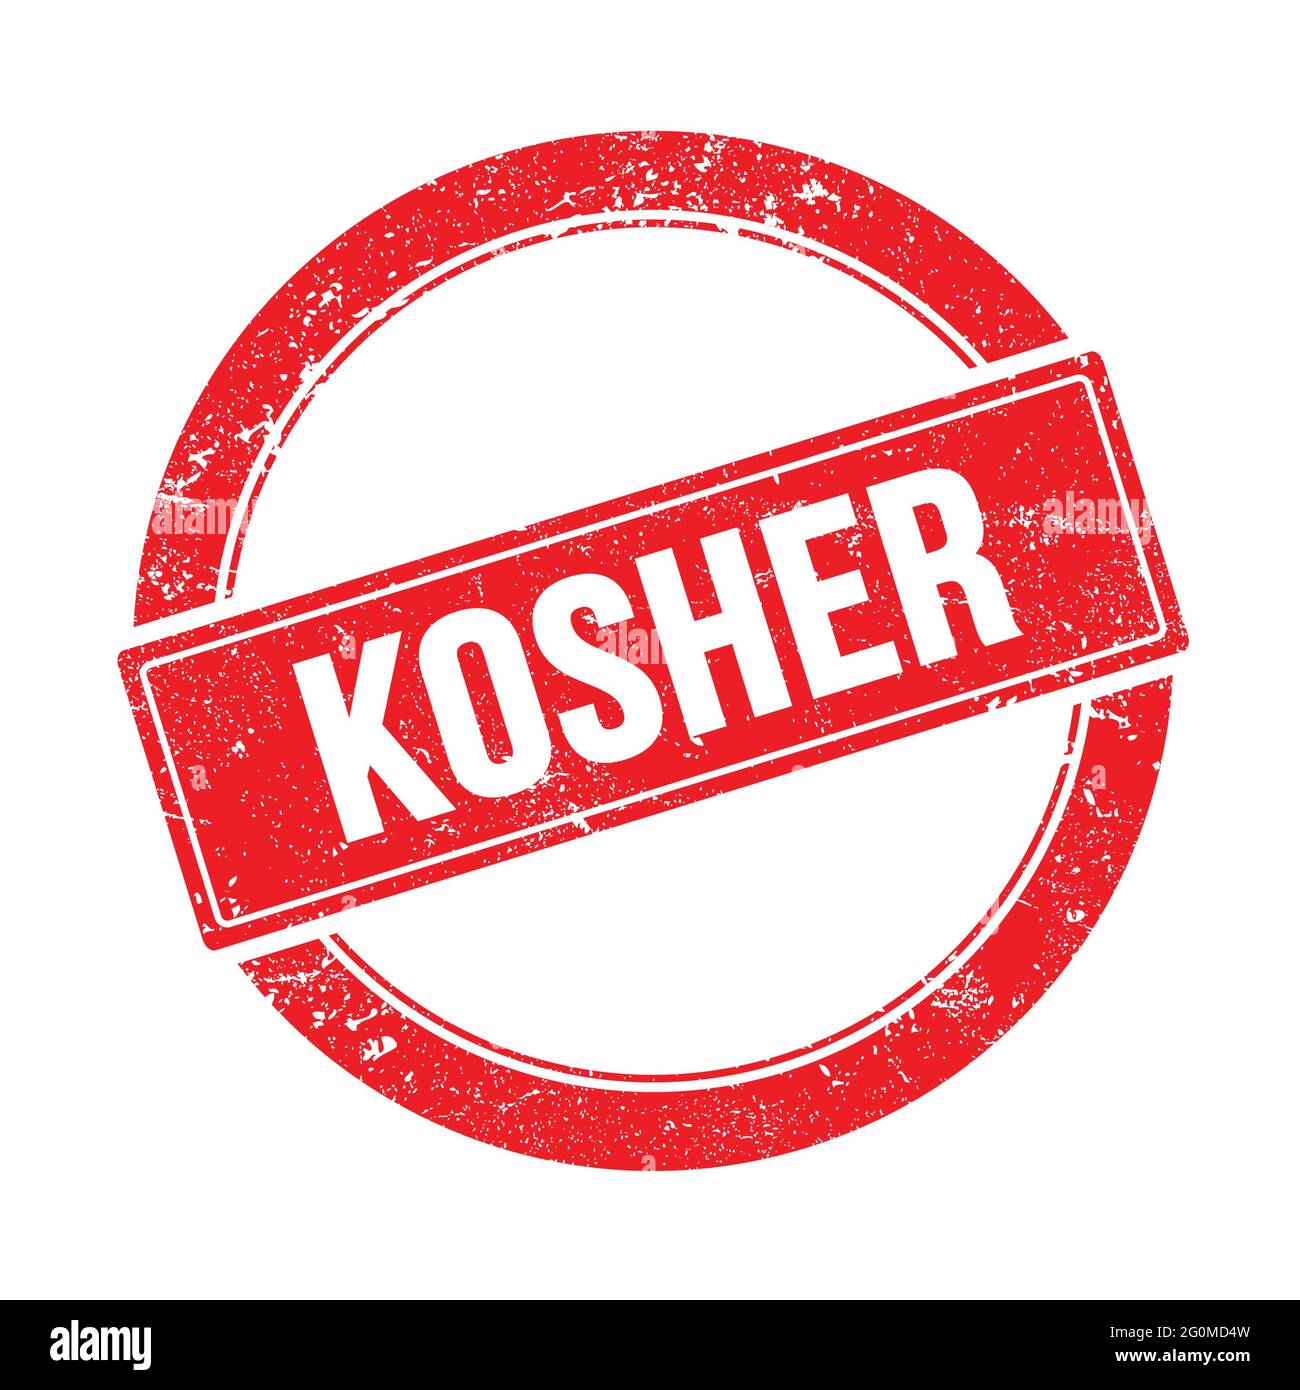 KOSHER text on red grungy round vintage stamp. Stock Photo